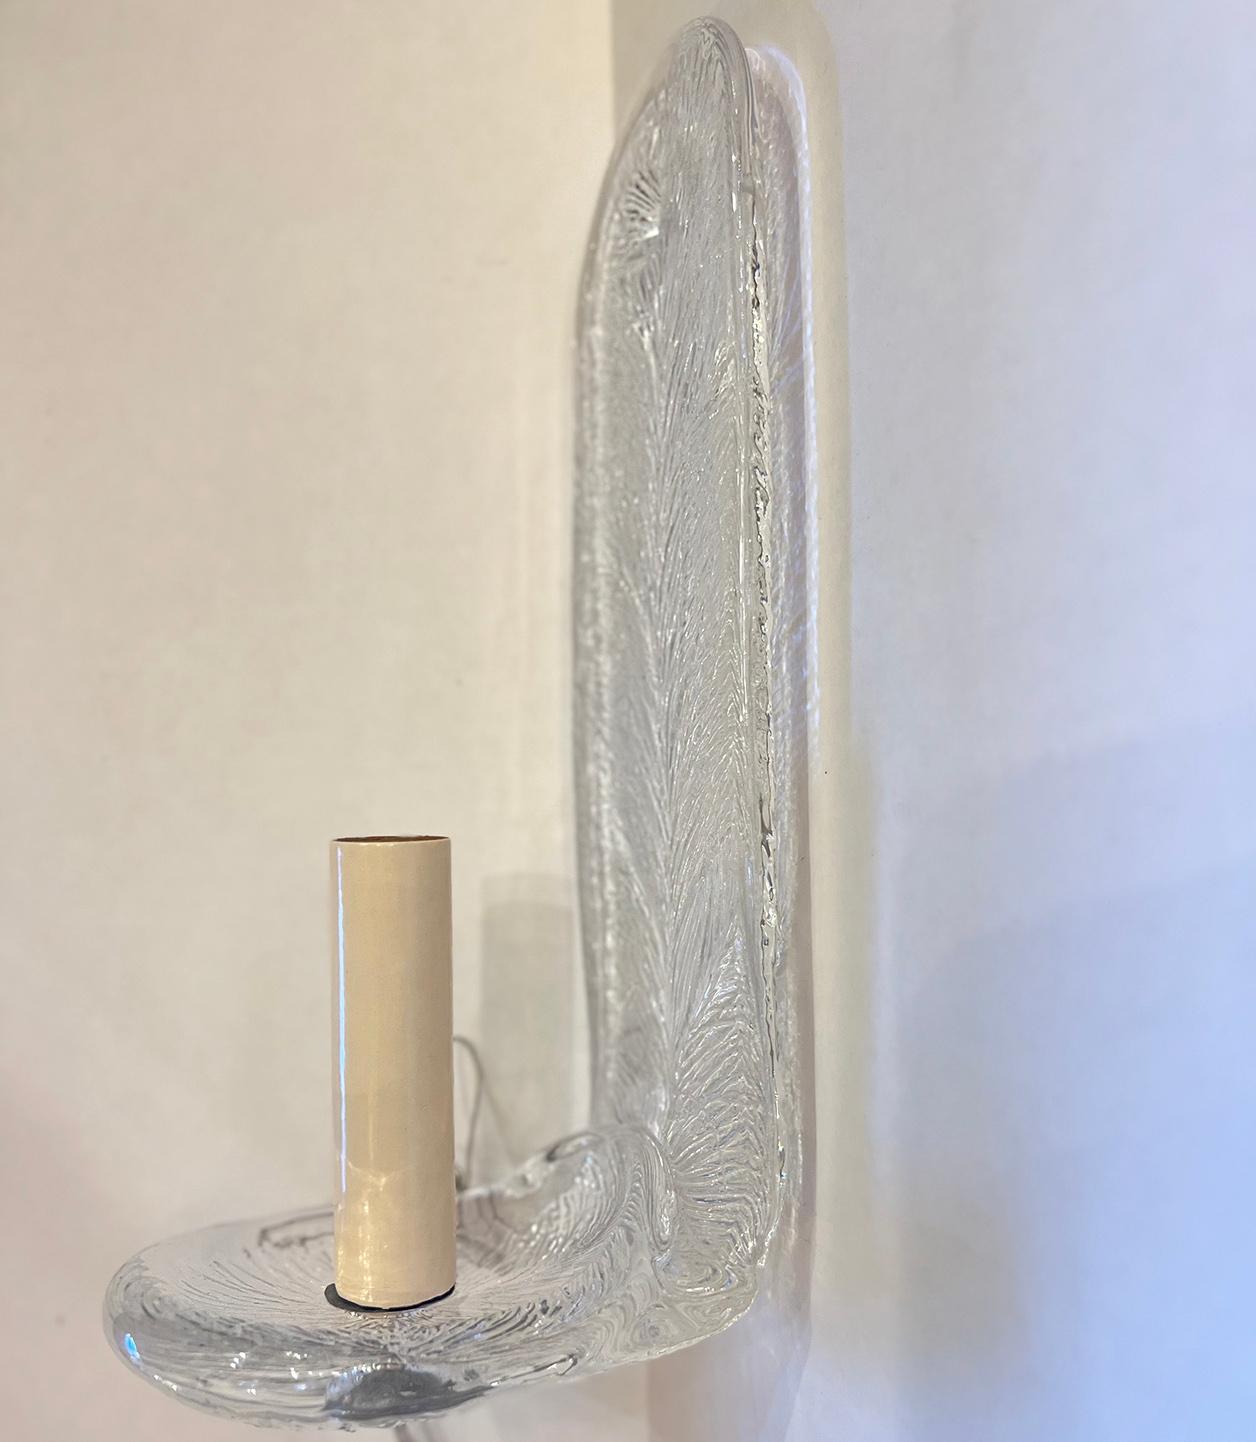 Pair of circa 1950's Swedish molded glass single light sconces.

Measurements:
Height:10